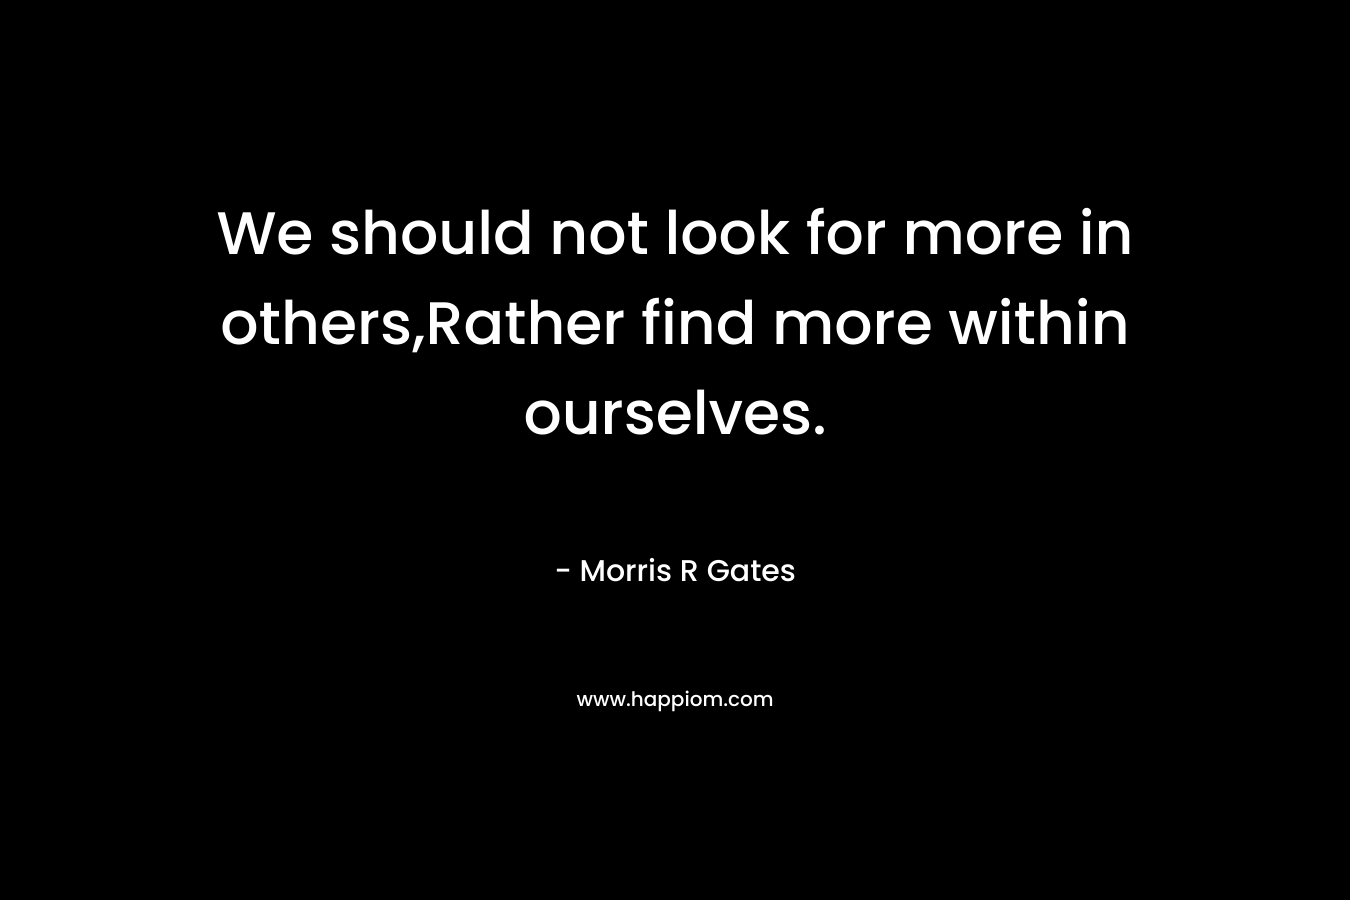 We should not look for more in others,Rather find more within ourselves.